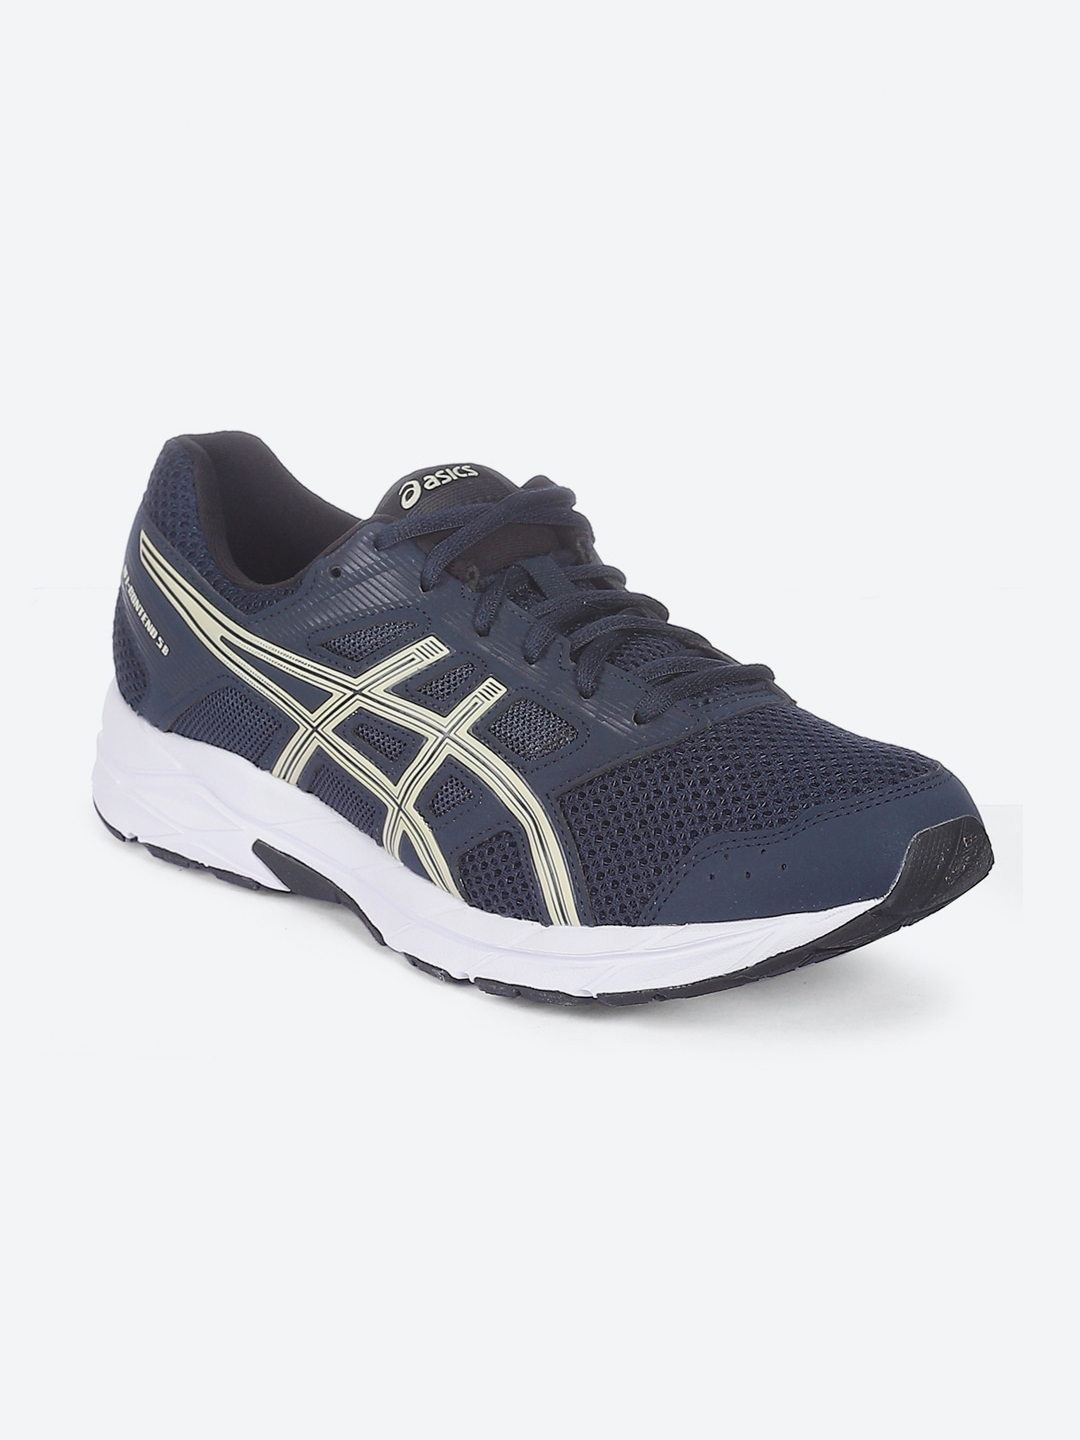 Buy ASICS Men GEL CONTEND 5B Running Sports Shoes - Sports Shoes for ...